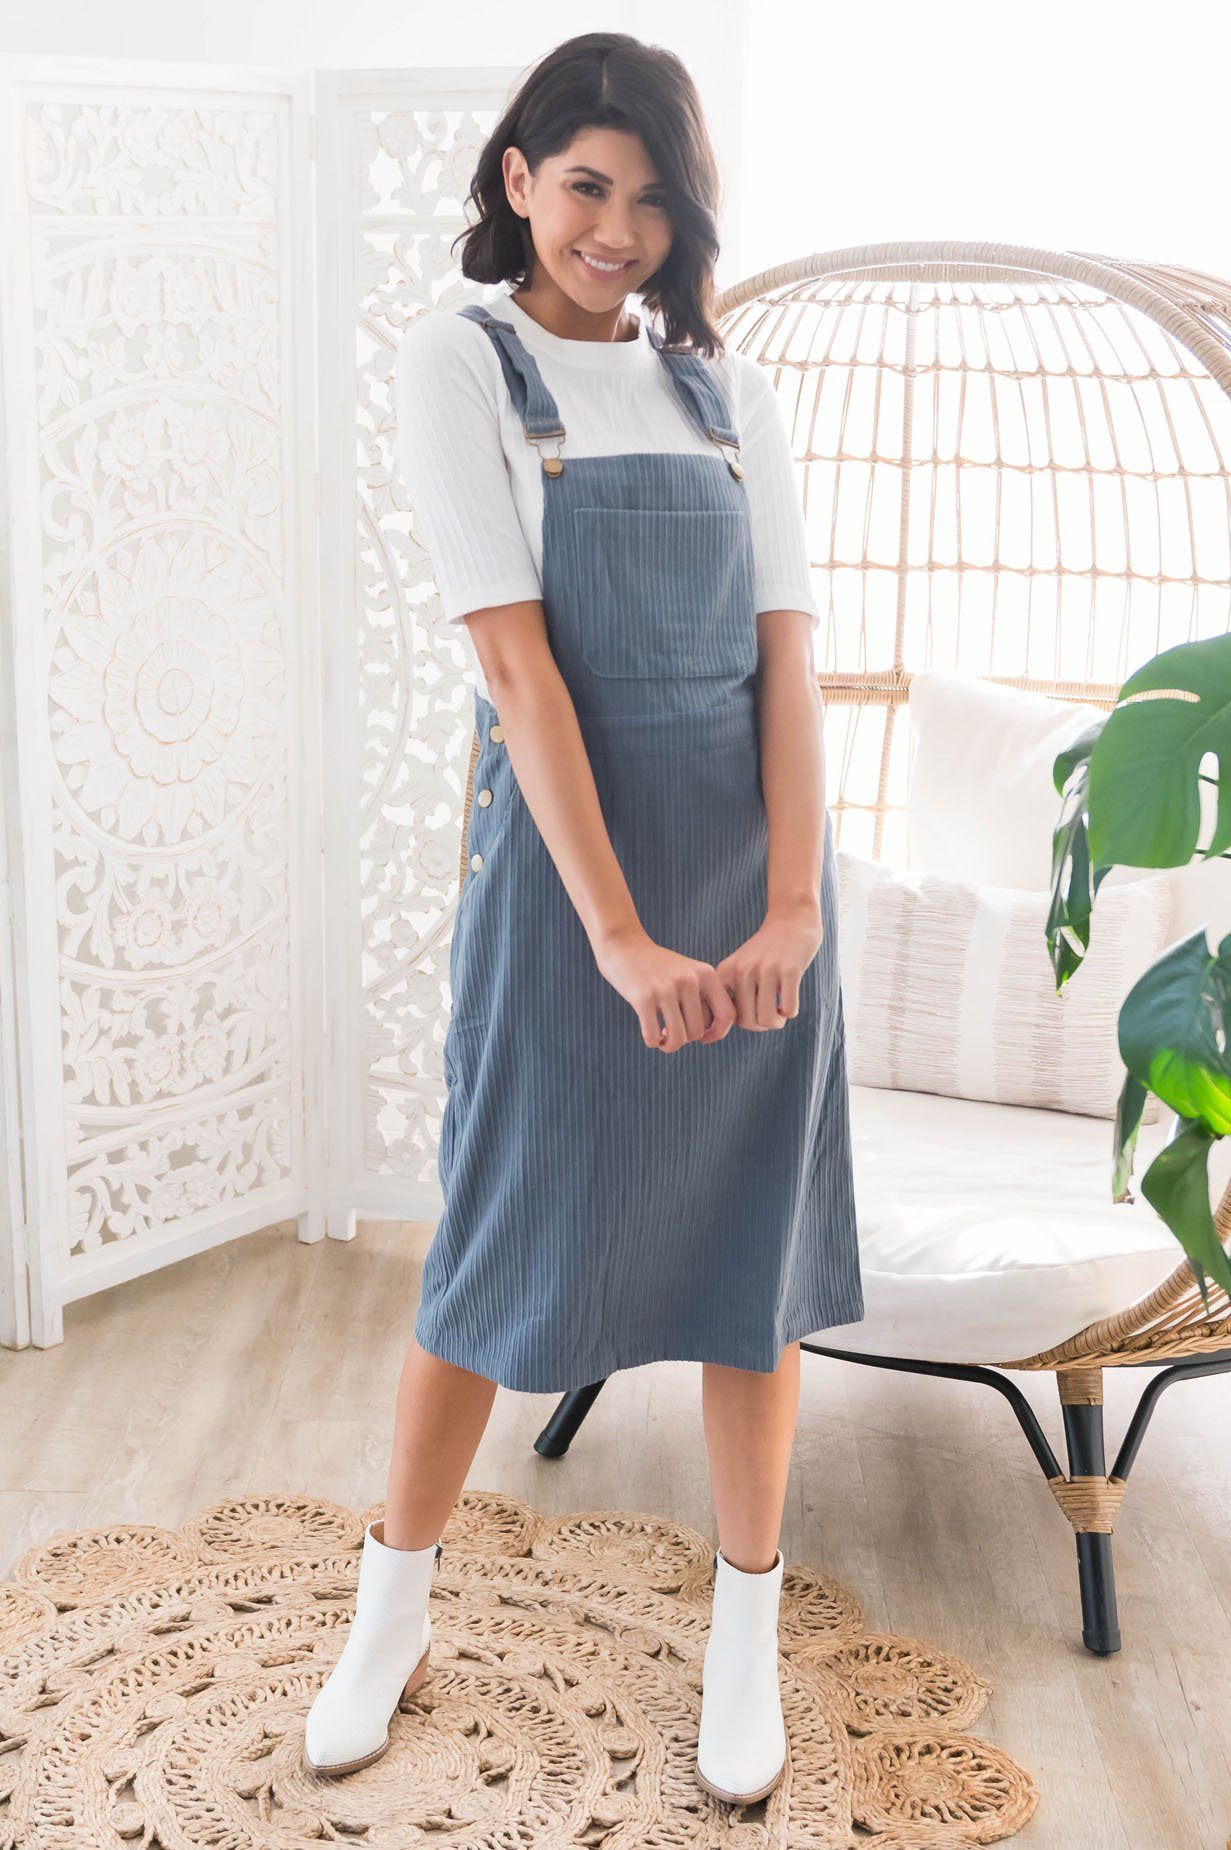 Boden Overall Dress  Girls modest fashion, Overall dress, Girl outfits